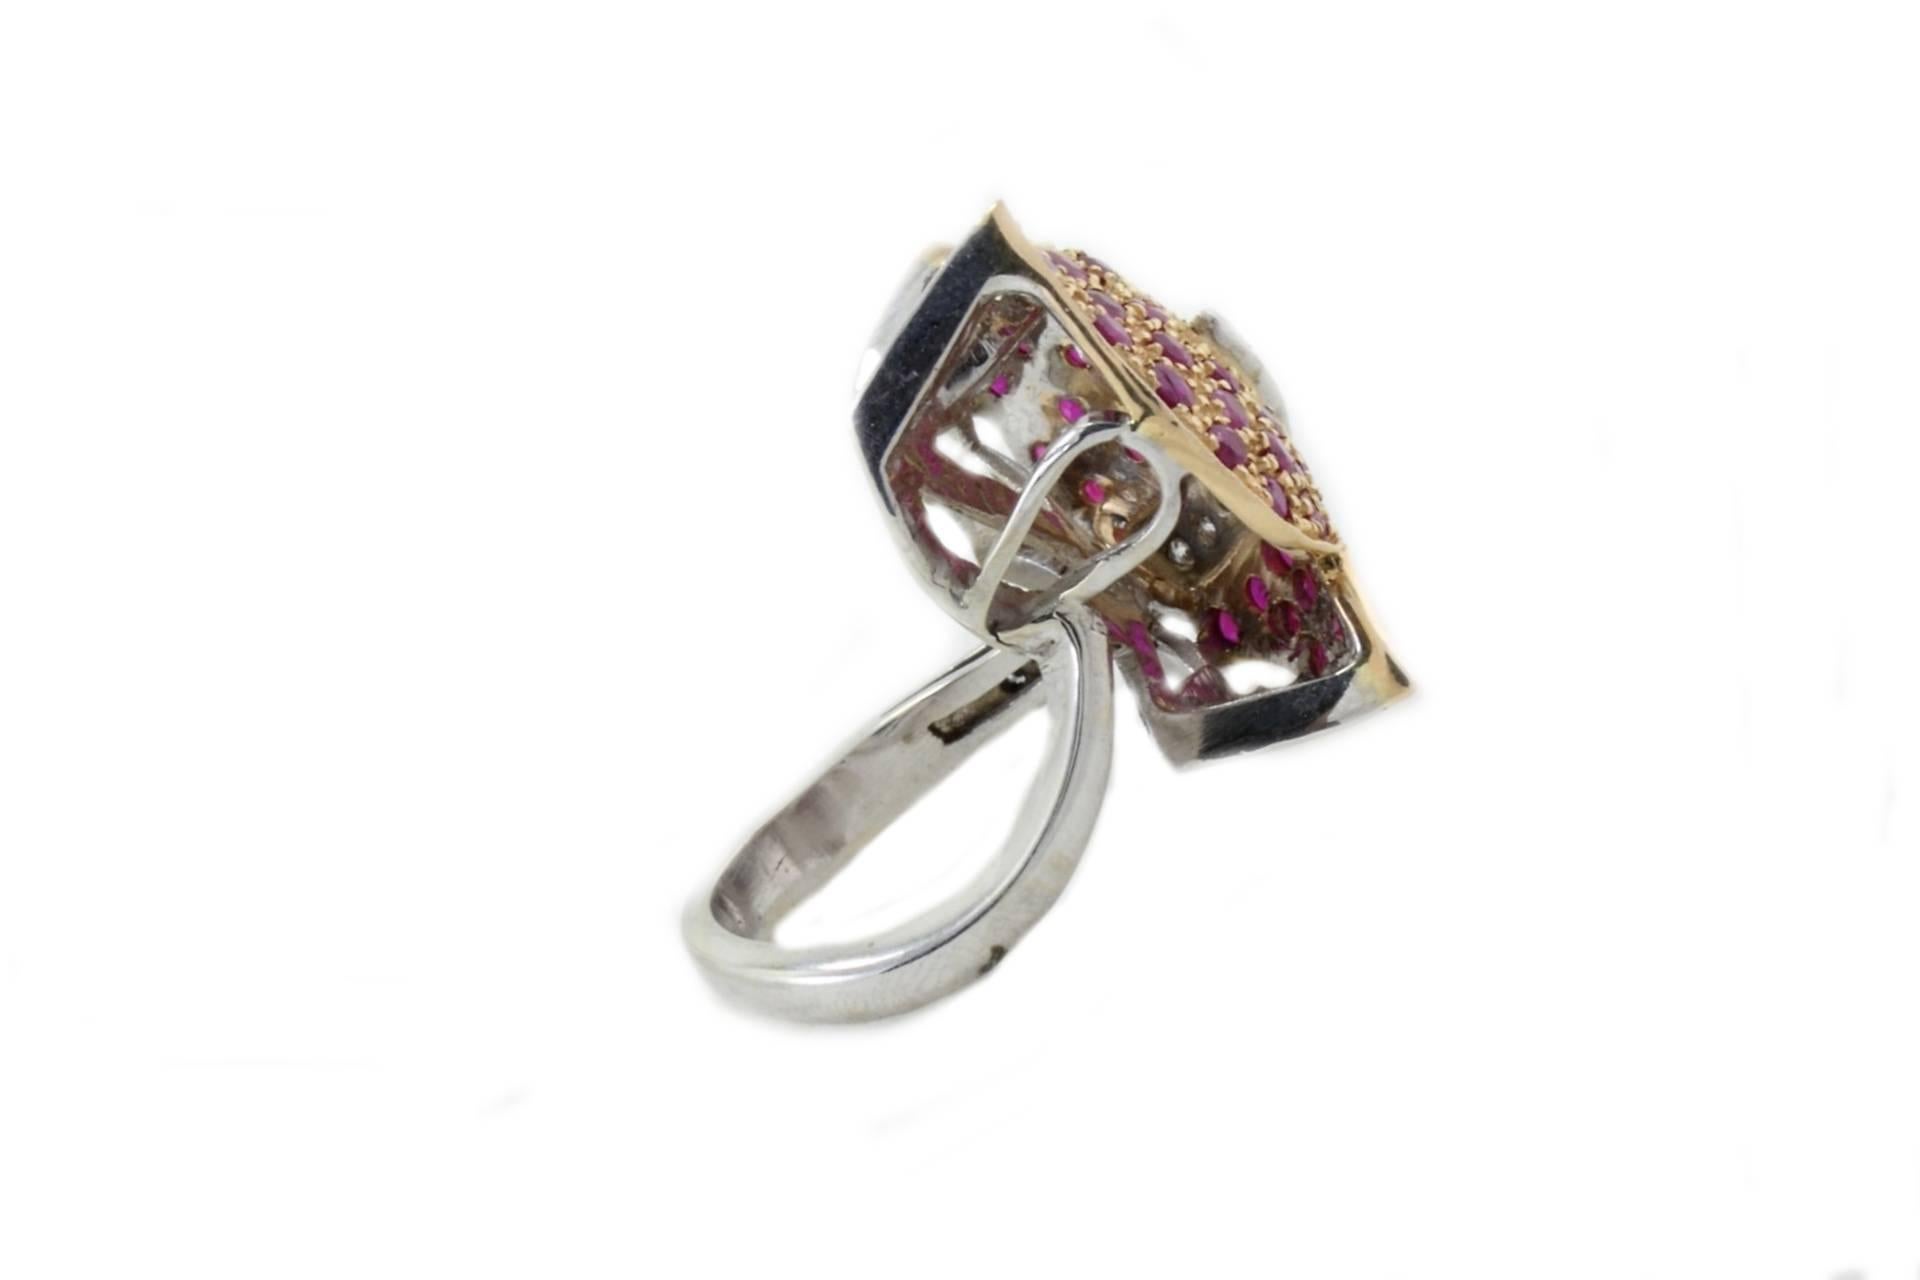 Leaf shaped ring in 14k white and yellow gold mounted with white diamonds and rubies.

Diamonds 0.24 kt
Rubies 2.68 kt
Tot.Weight 11.30 gr
R.F giho